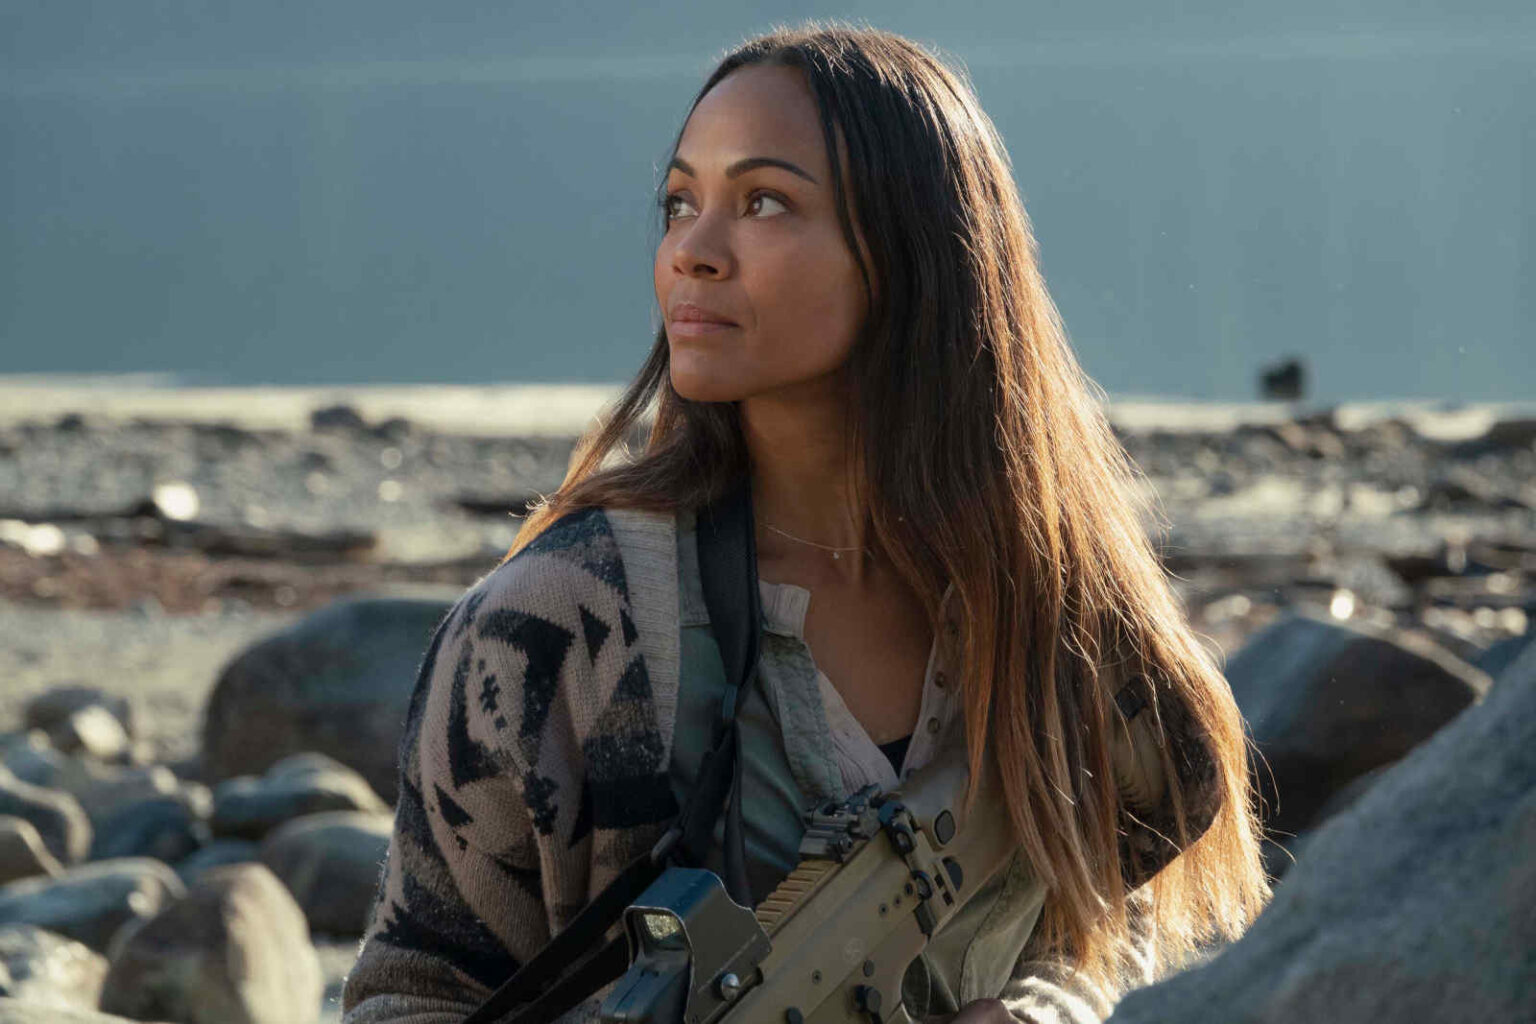 In Guardians of the Galaxy Vol. 3, we see a Gamora who is part of the Ravagers, go rogue. Here's what that means for Zoe Saldana's net worth.